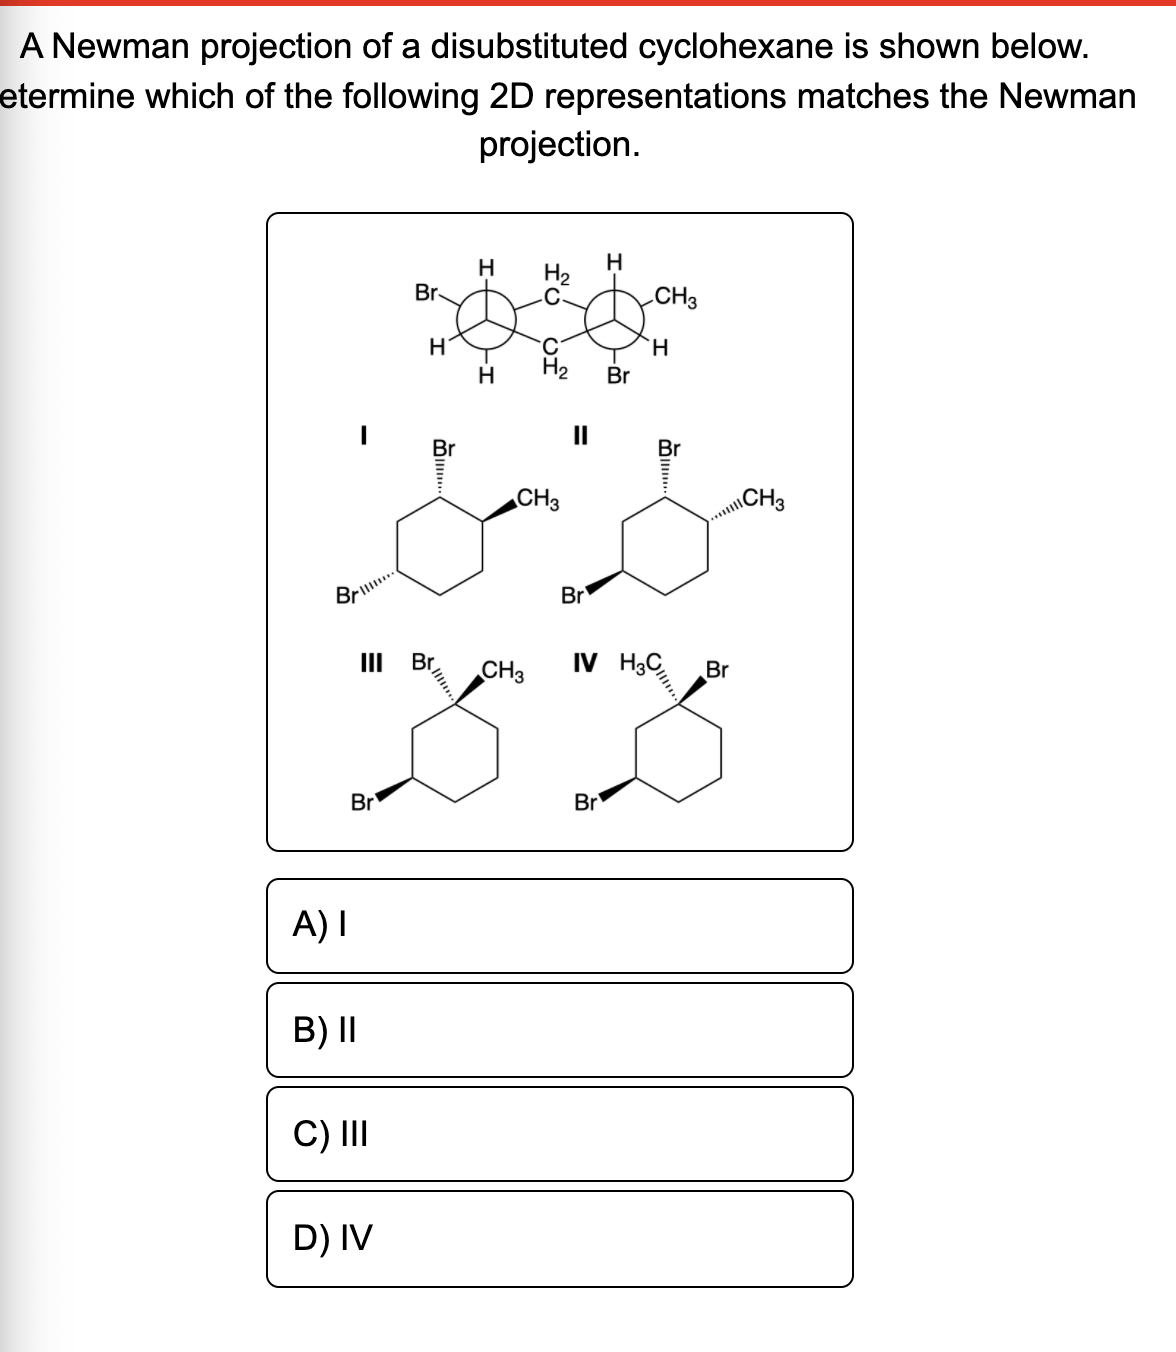 A Newman projection of a disubstituted cyclohexane is shown below.
etermine which of the following 2D representations matches the Newman
projection.
H
Br
H2
CH3
H
H2
Br
II
Br
Br
CH3
ICH3
Brl.
Br
II
Br
CH3
IV H3C
Br
Br
Br
A) I
B) II
C) II
D) IV
